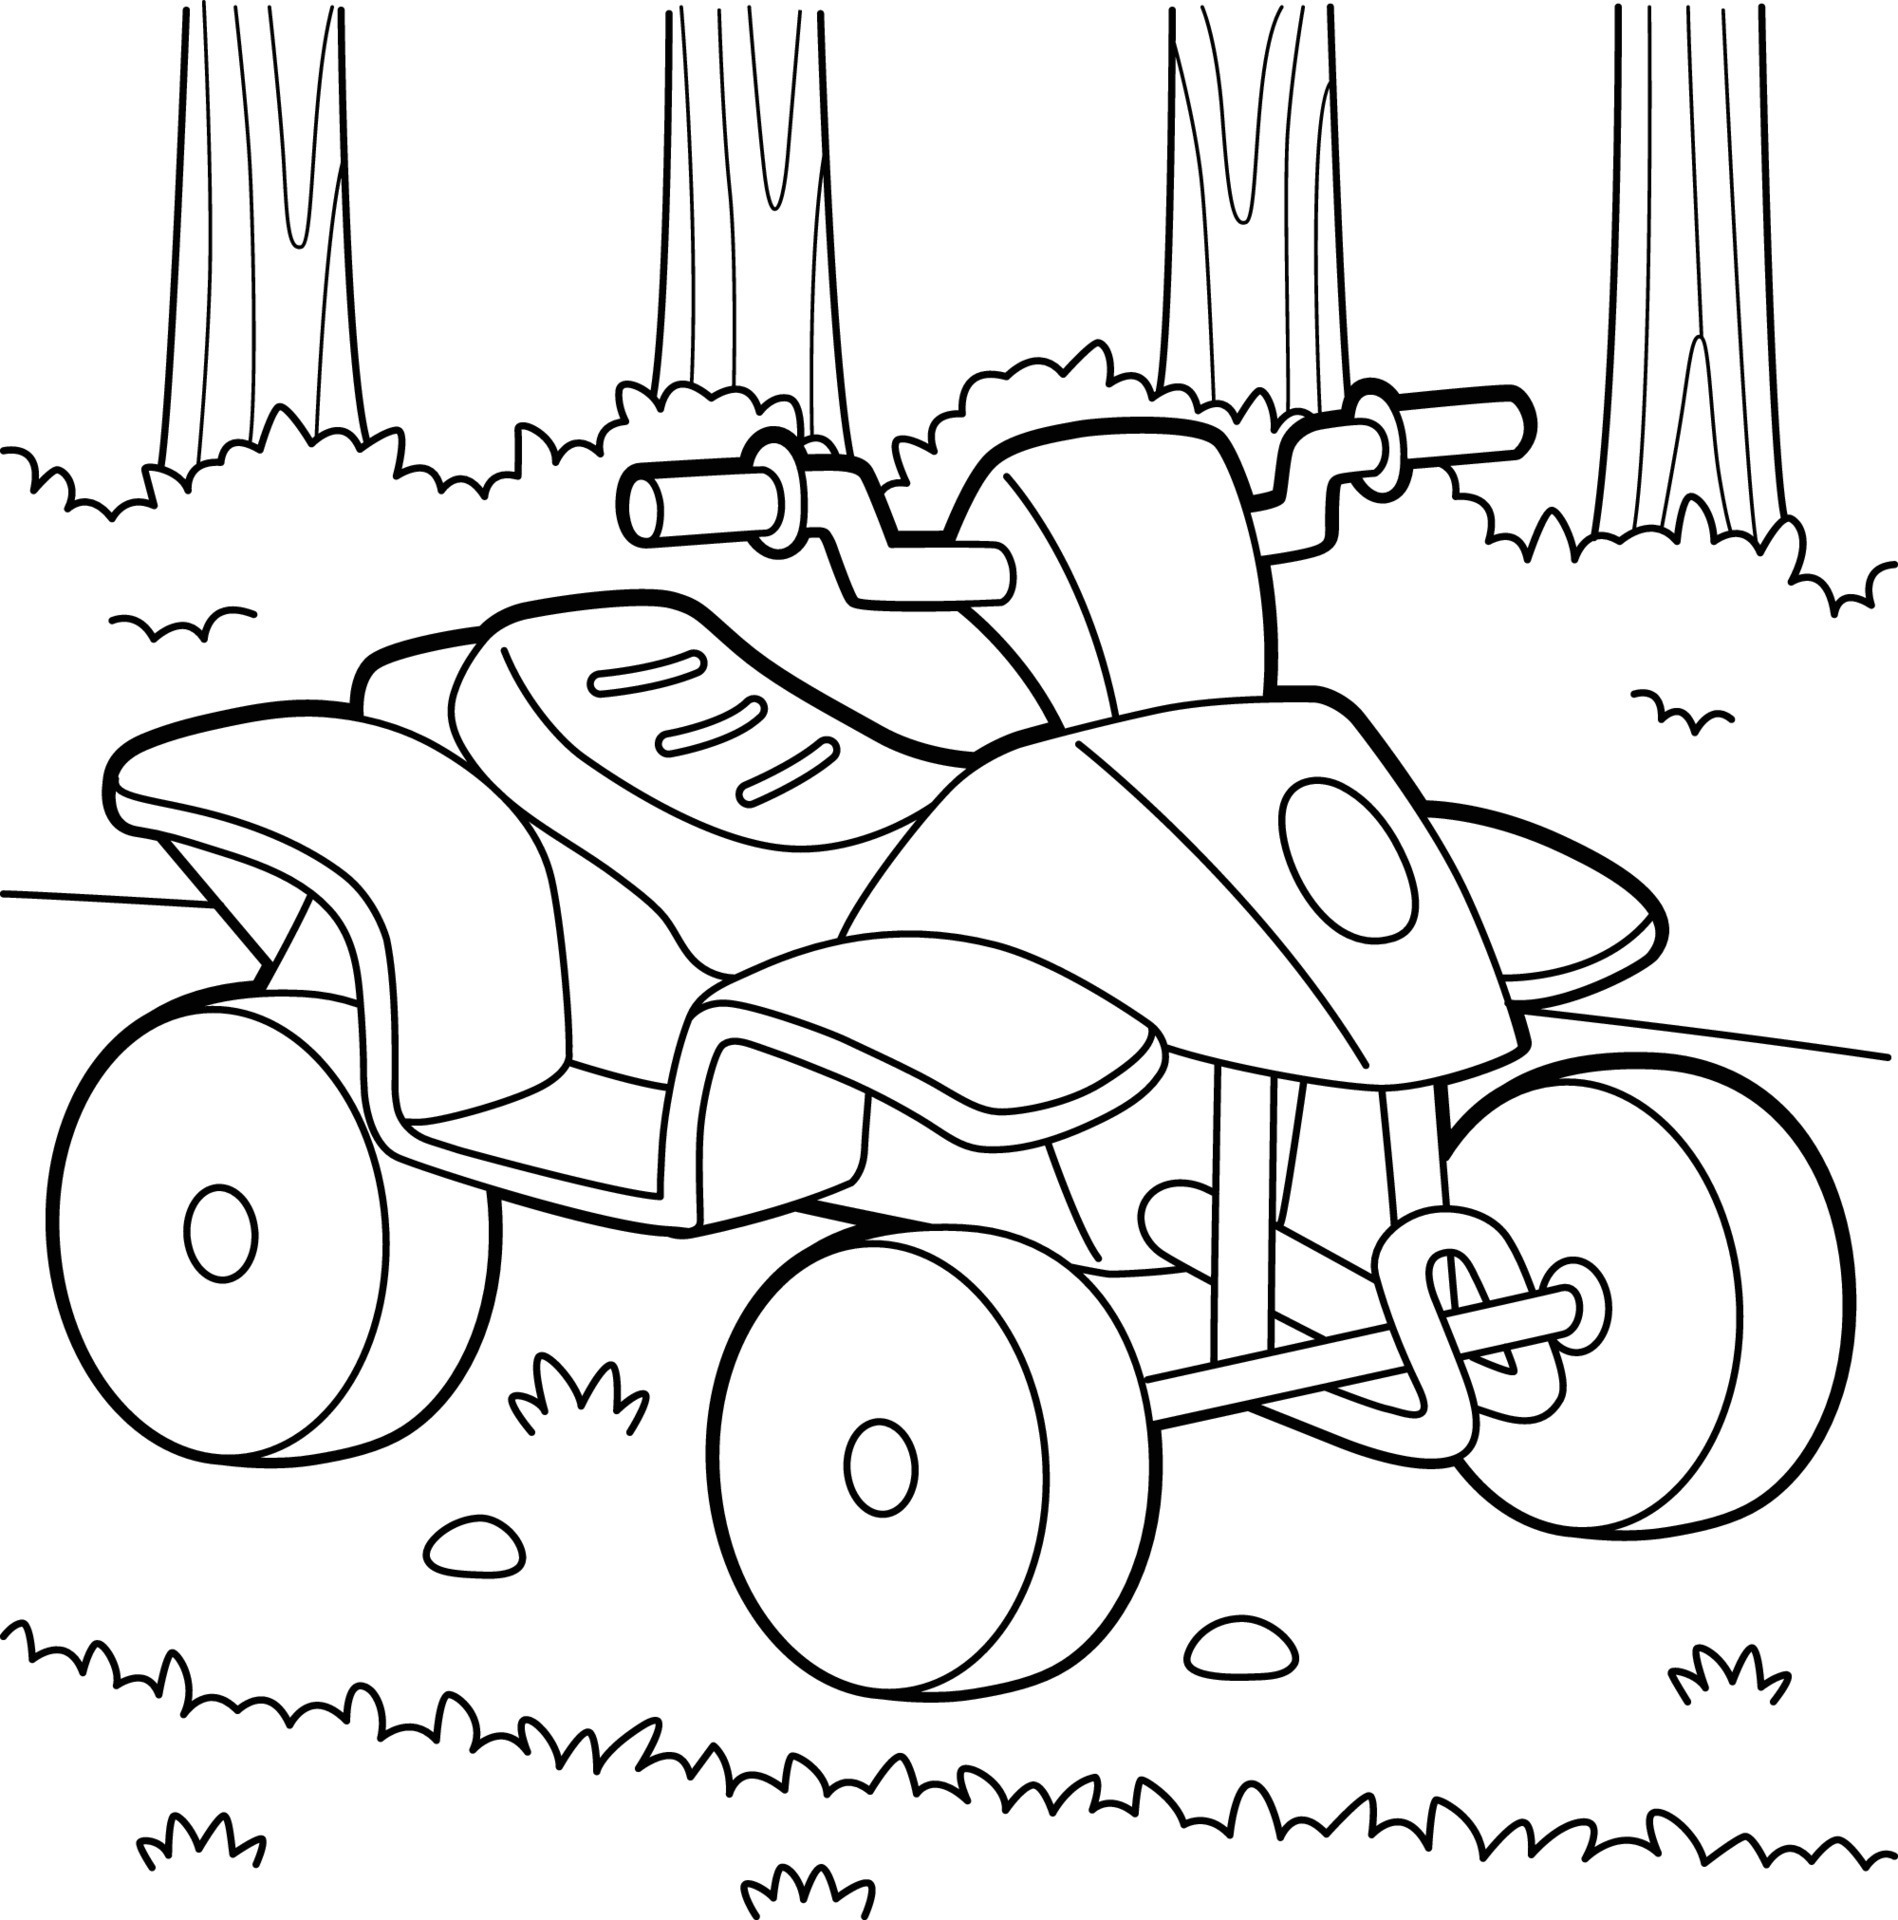 Great coloring book for kids on quad bikes